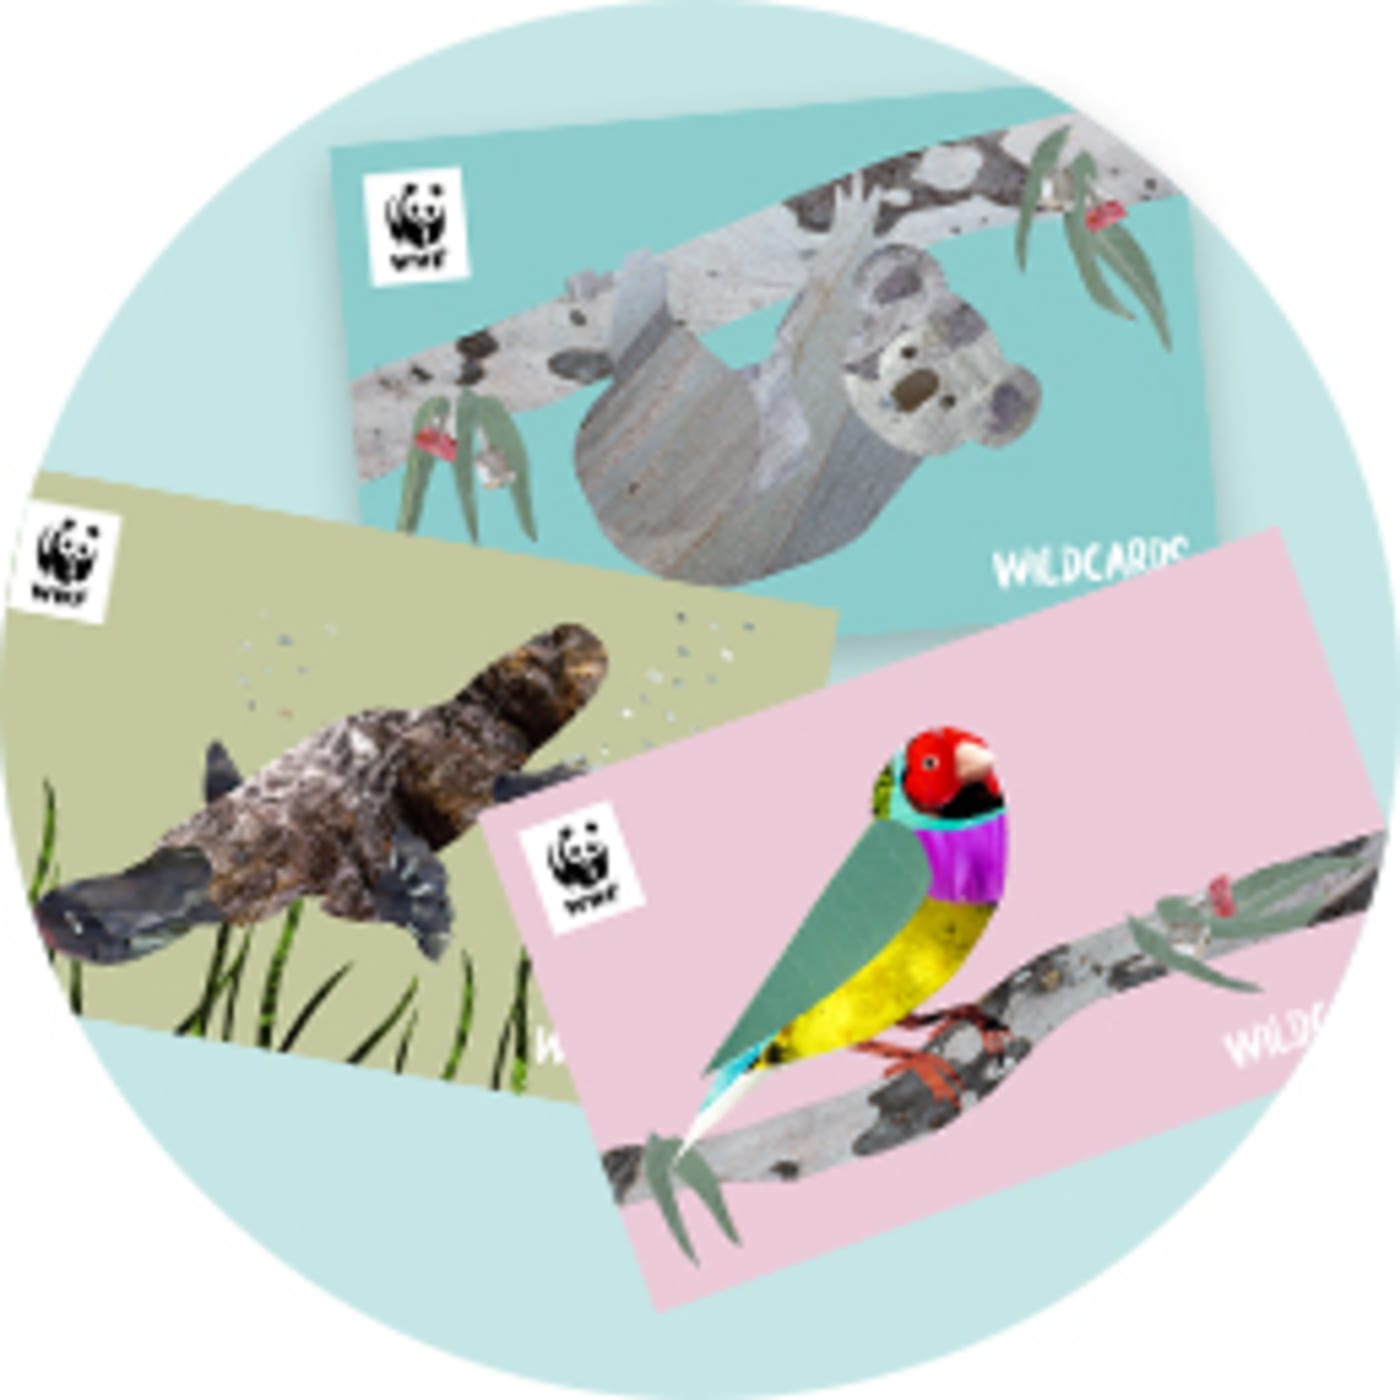 Image of 3 illustrated wildcards featuring a koala, platypus and bird